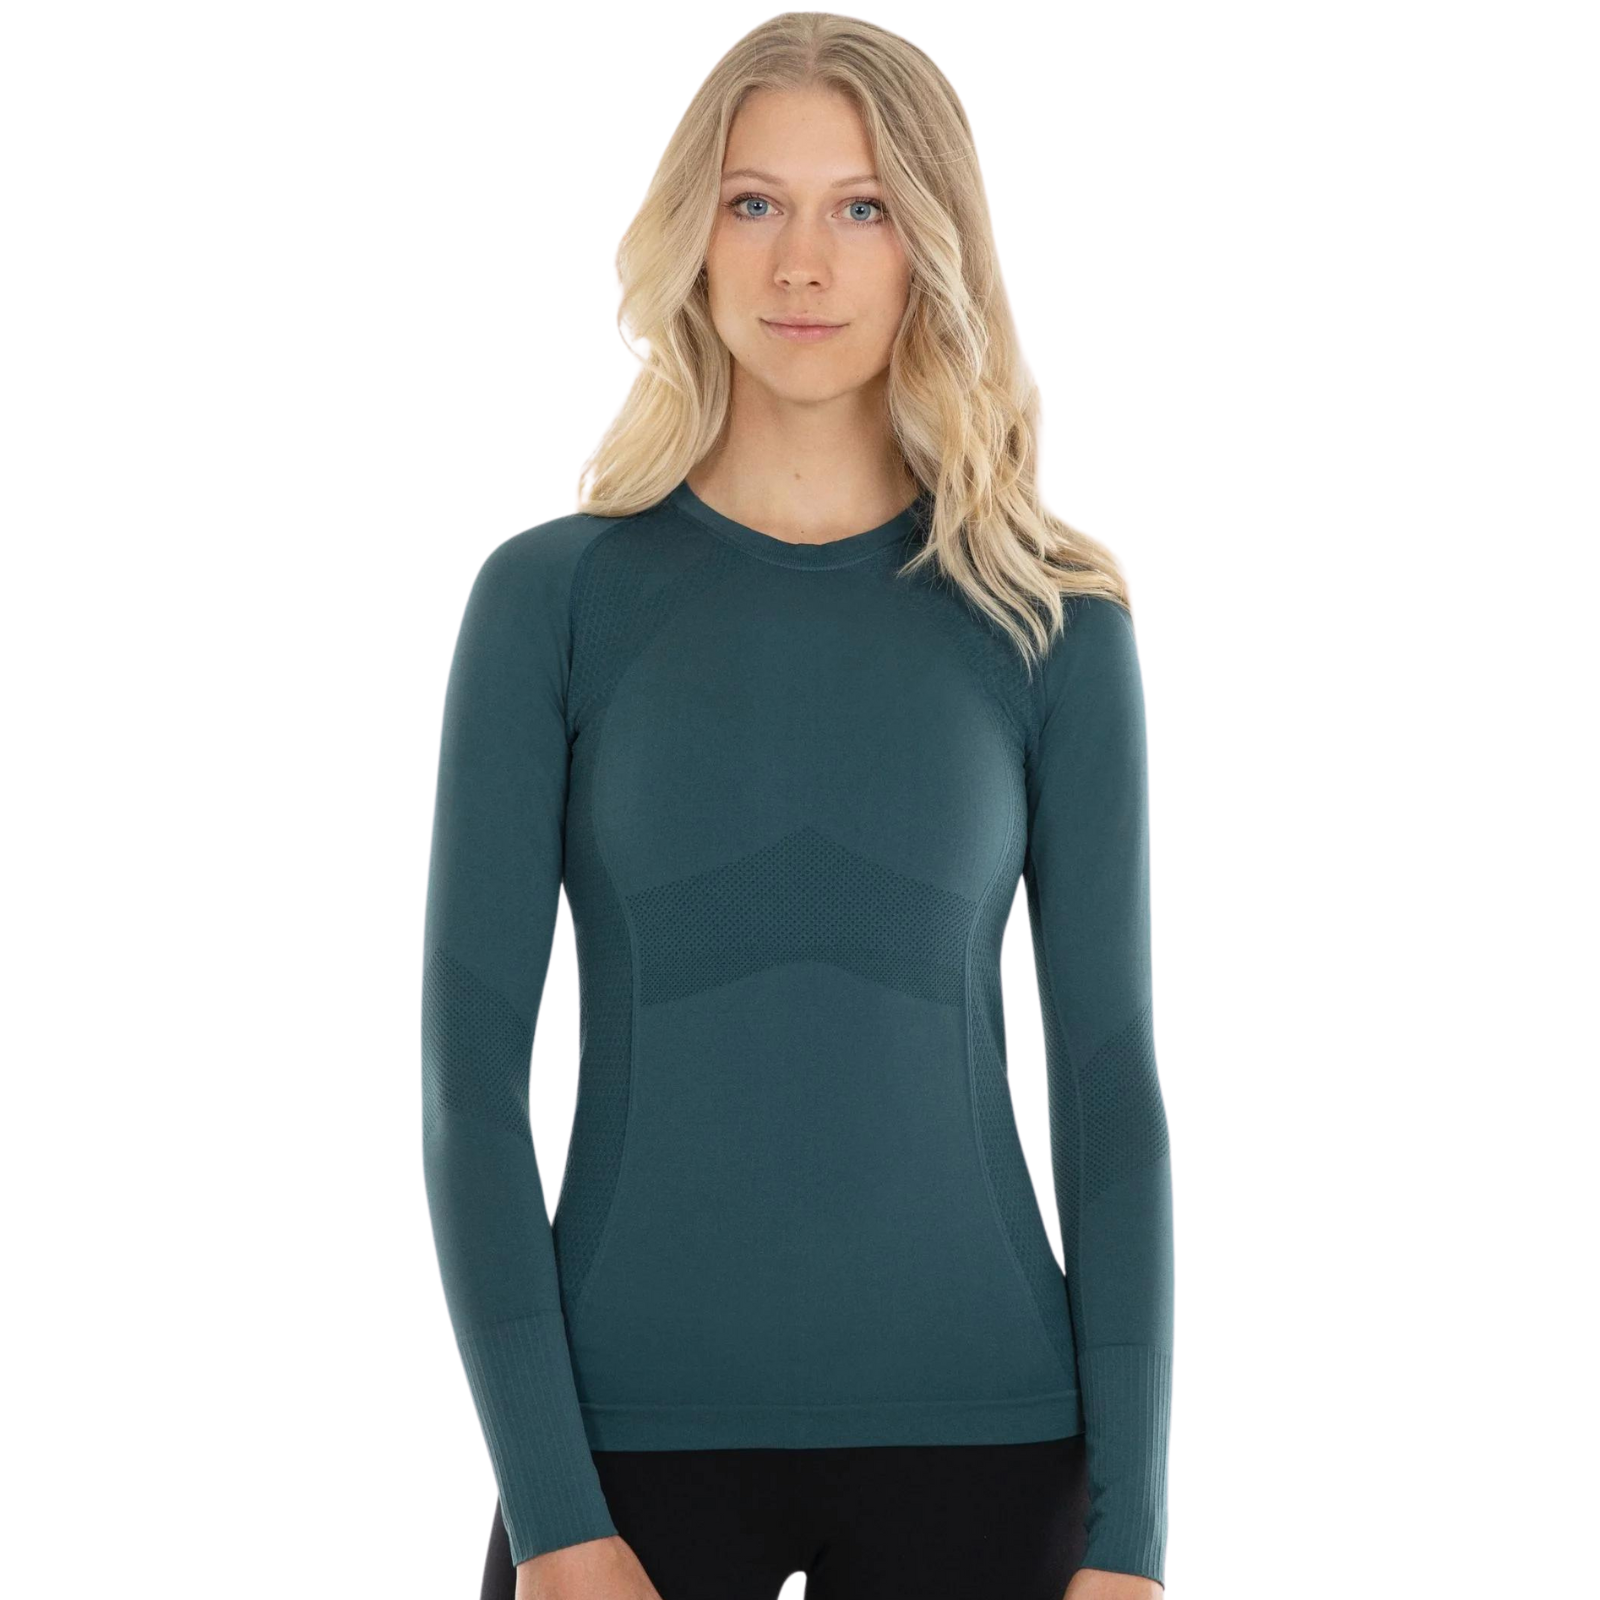 Anique Long Sleeve Crew Shirt in Peppermint - Women&#39;s Small (4-6)